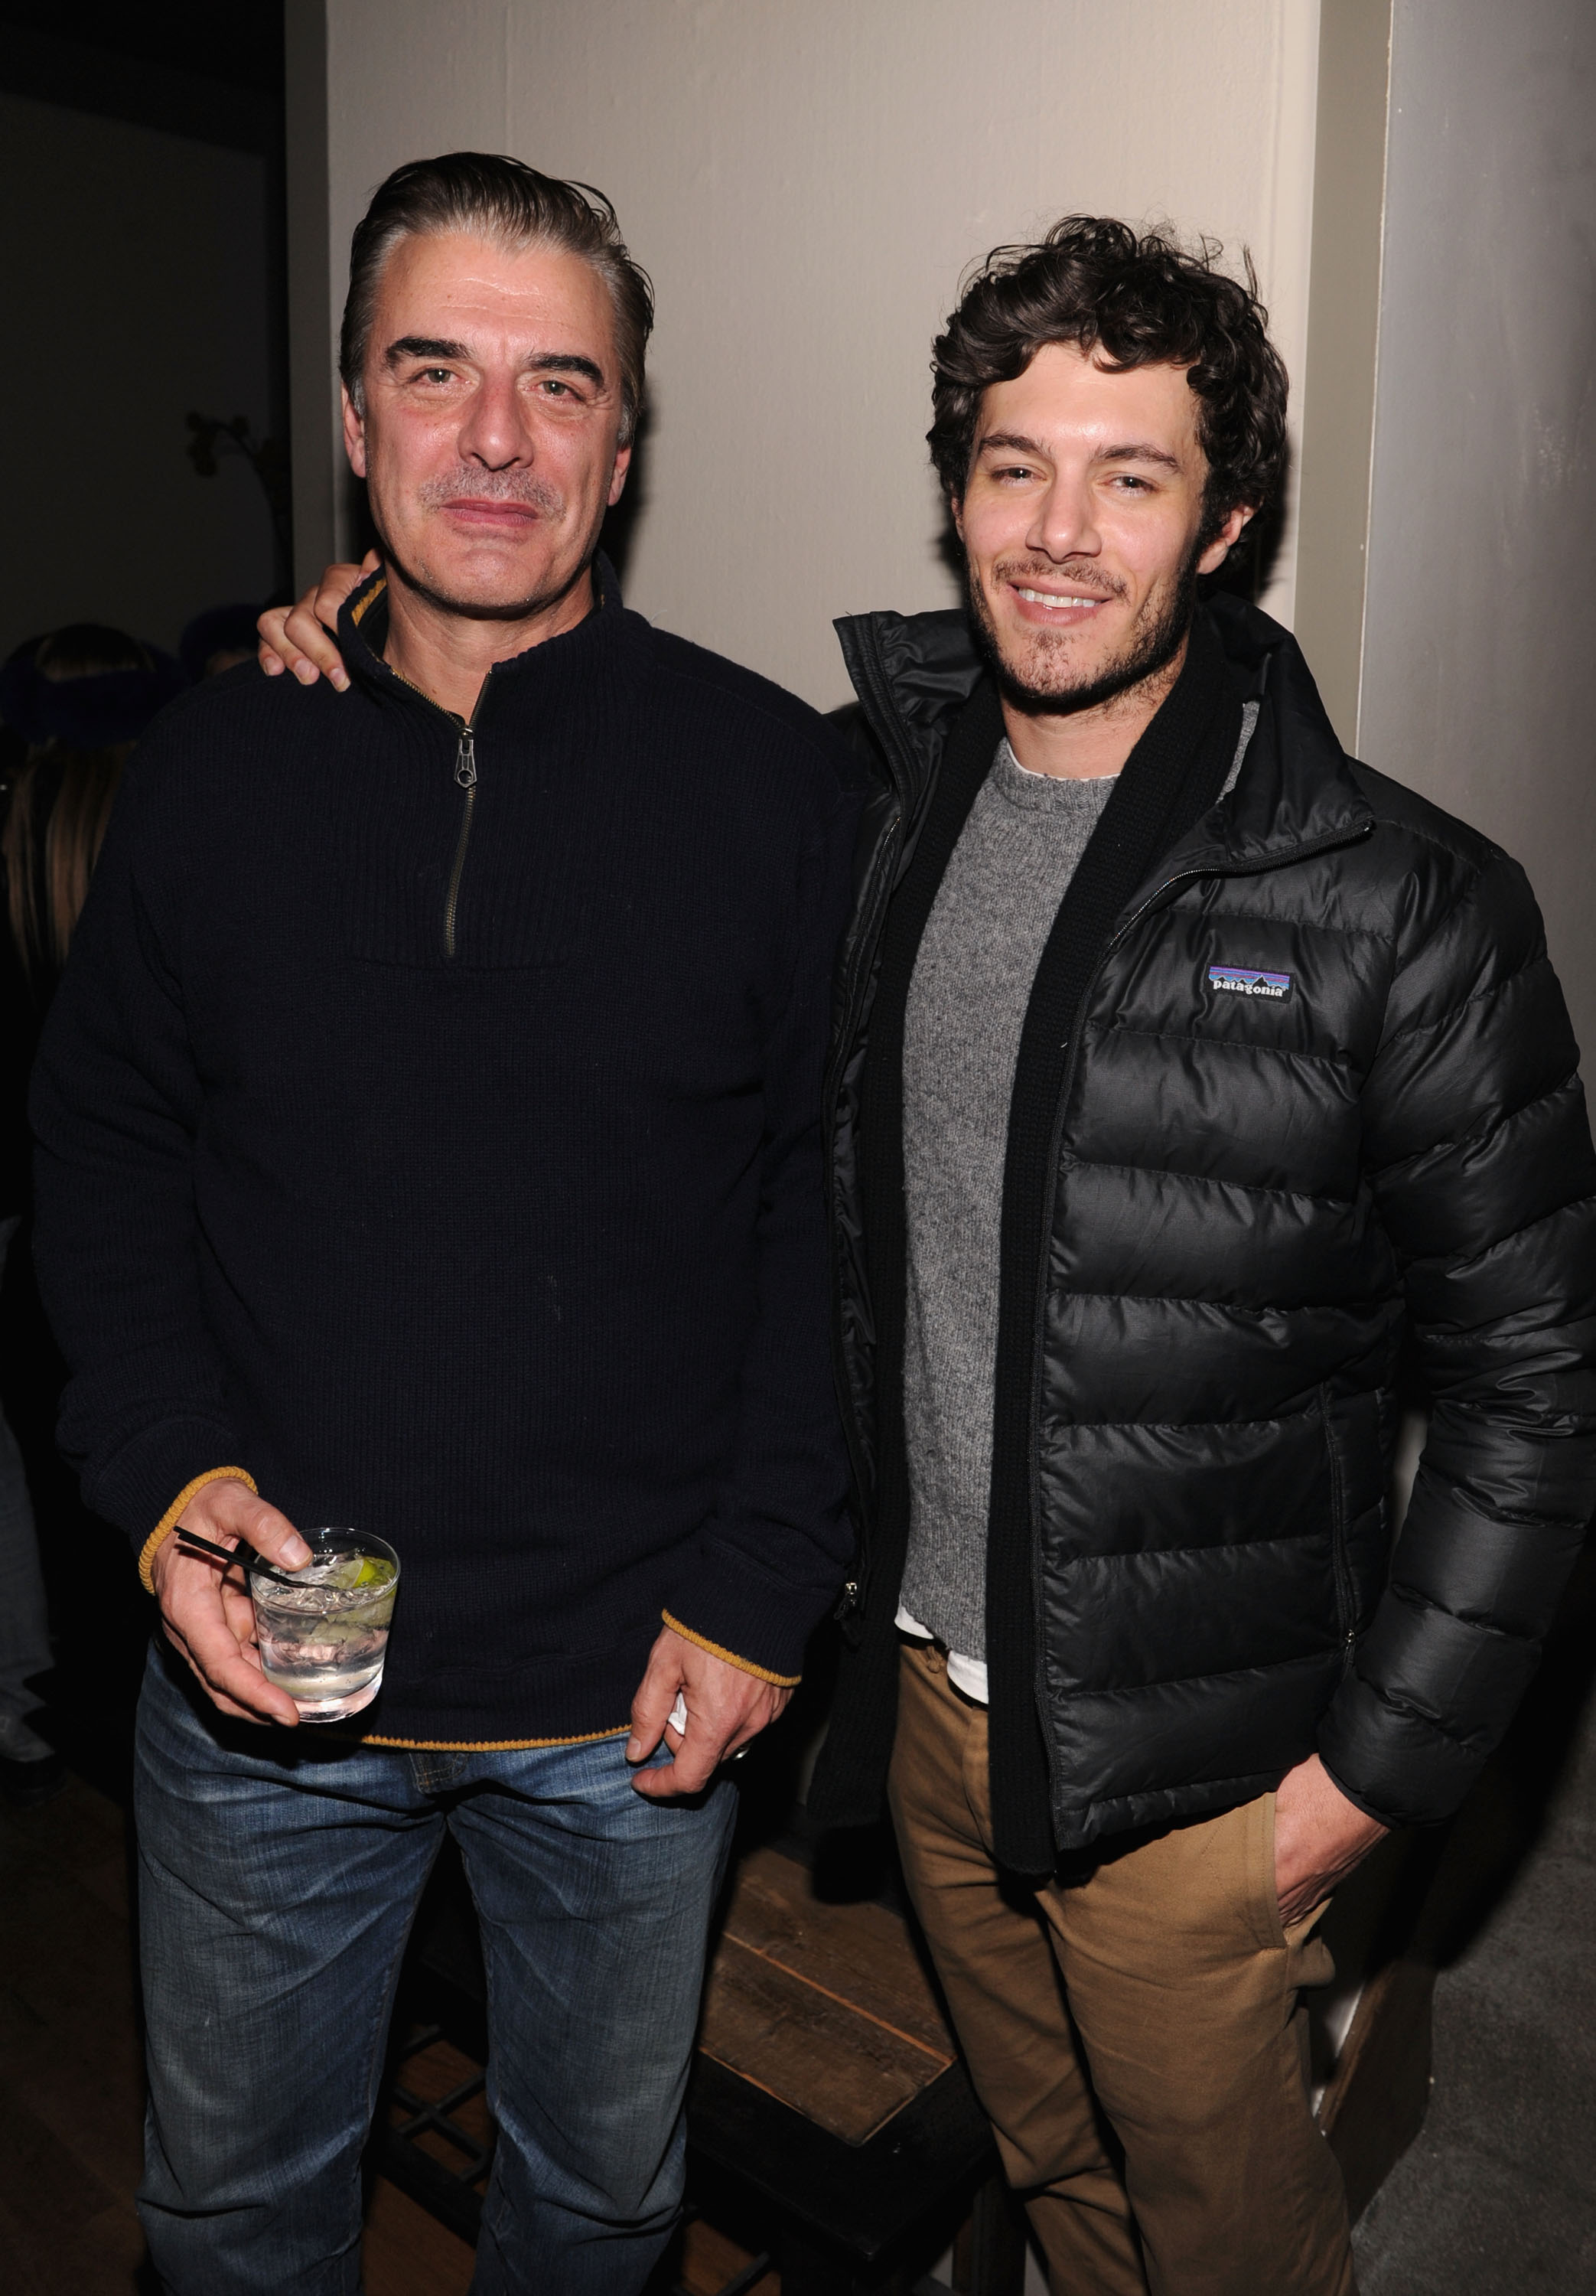 PARK CITY, UT - JANUARY 22:  Actors Chris Noth and Adam Brody attend the Grey Goose Blue Door "Lovelace" Party  on January 22, 2013 in Park City, Utah.  (Photo by Jamie McCarthy/Getty Images for Grey Goose)